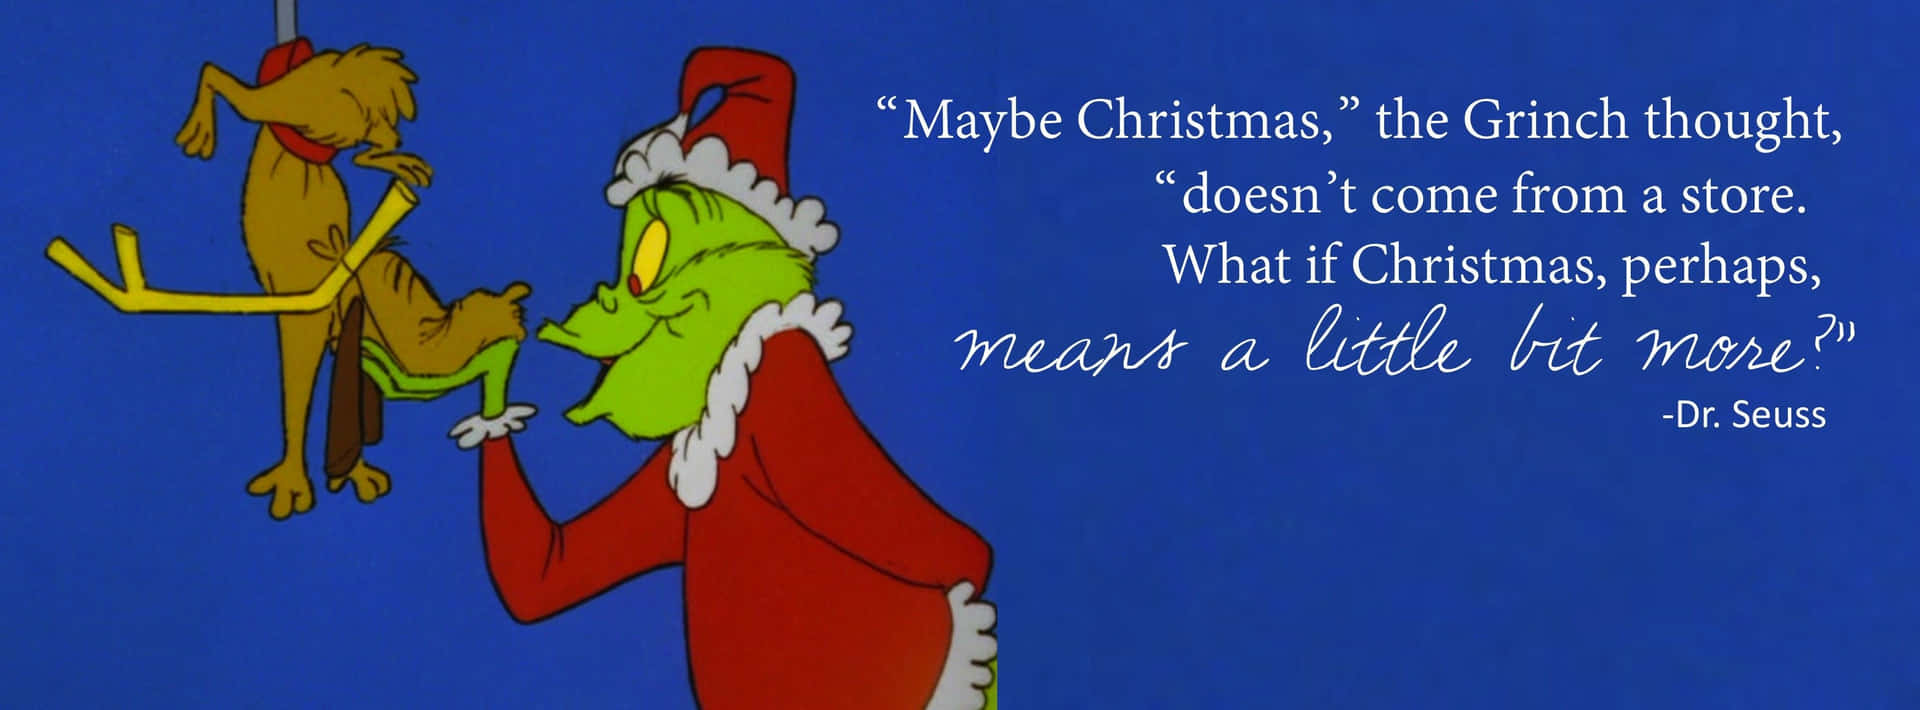 A Festive Look For The Christmas Grinch! Background